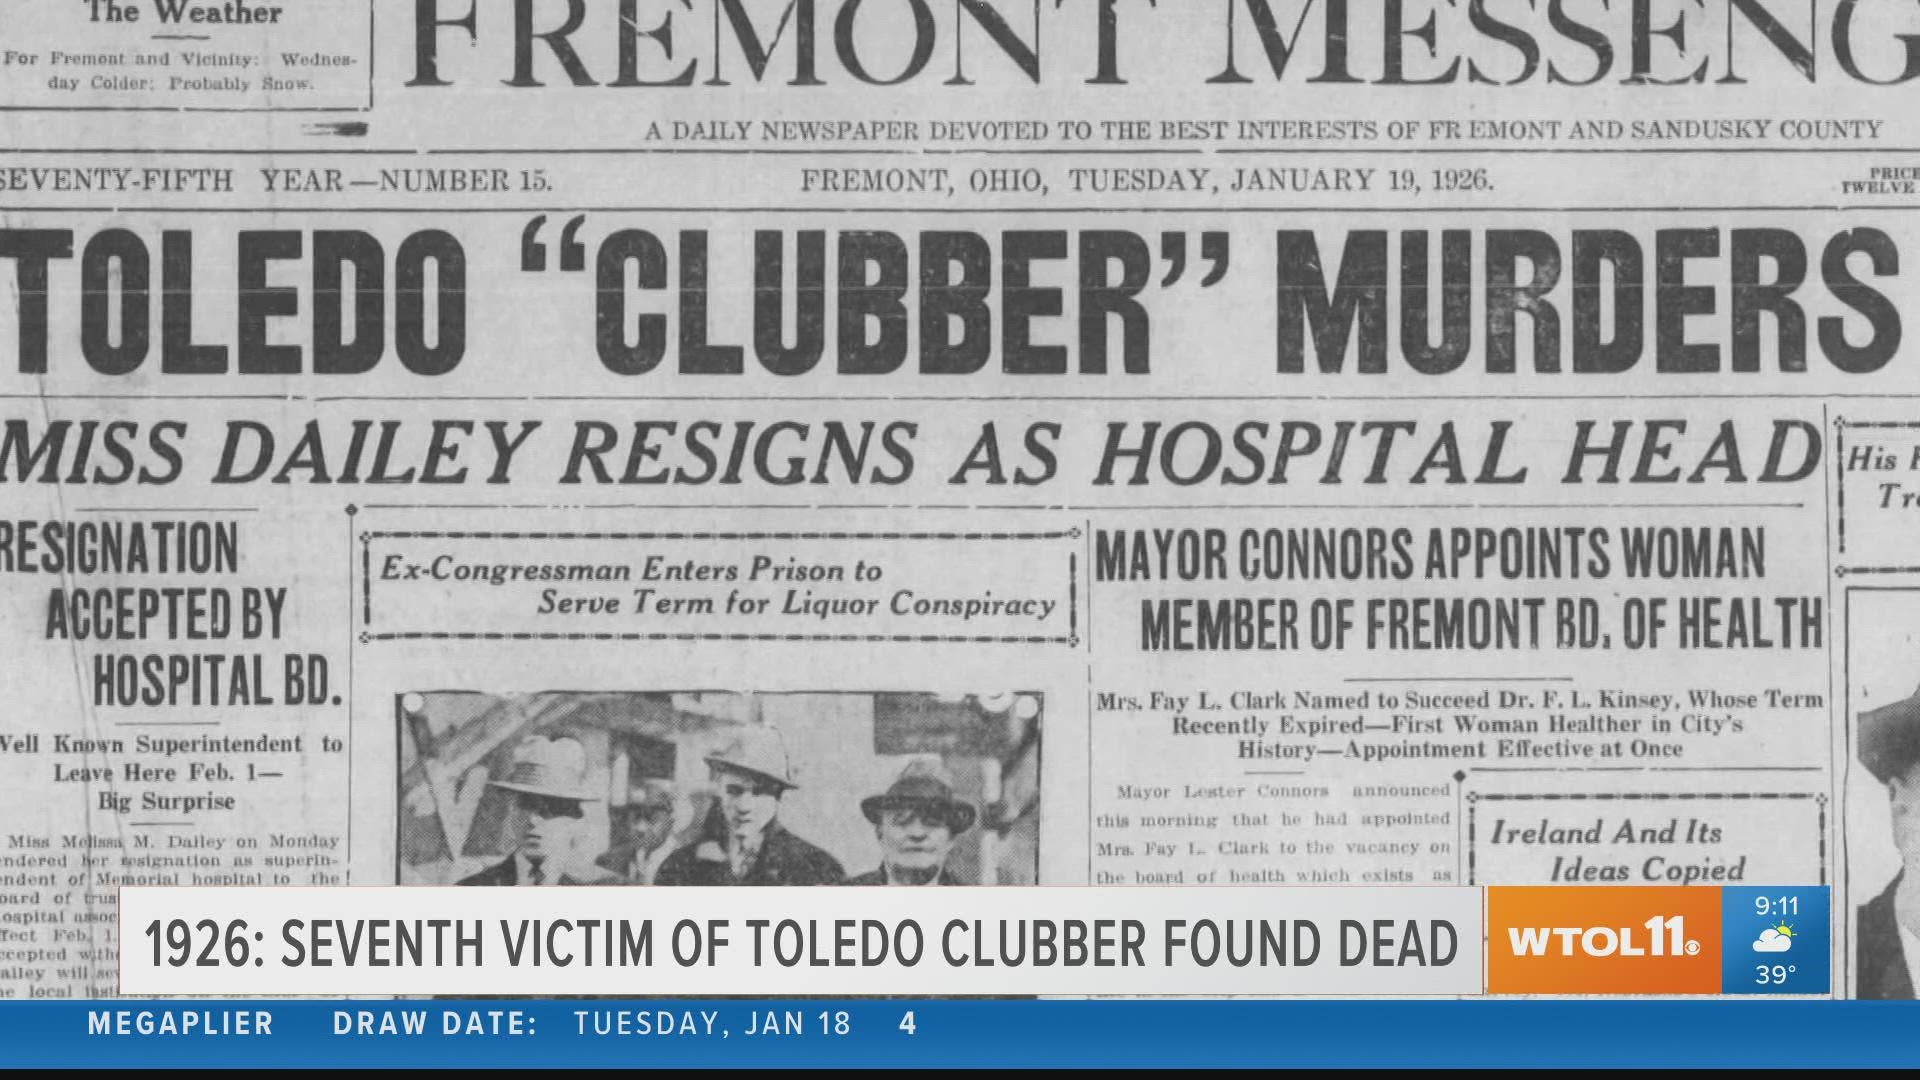 Find out what happened on this day in Toledo history.